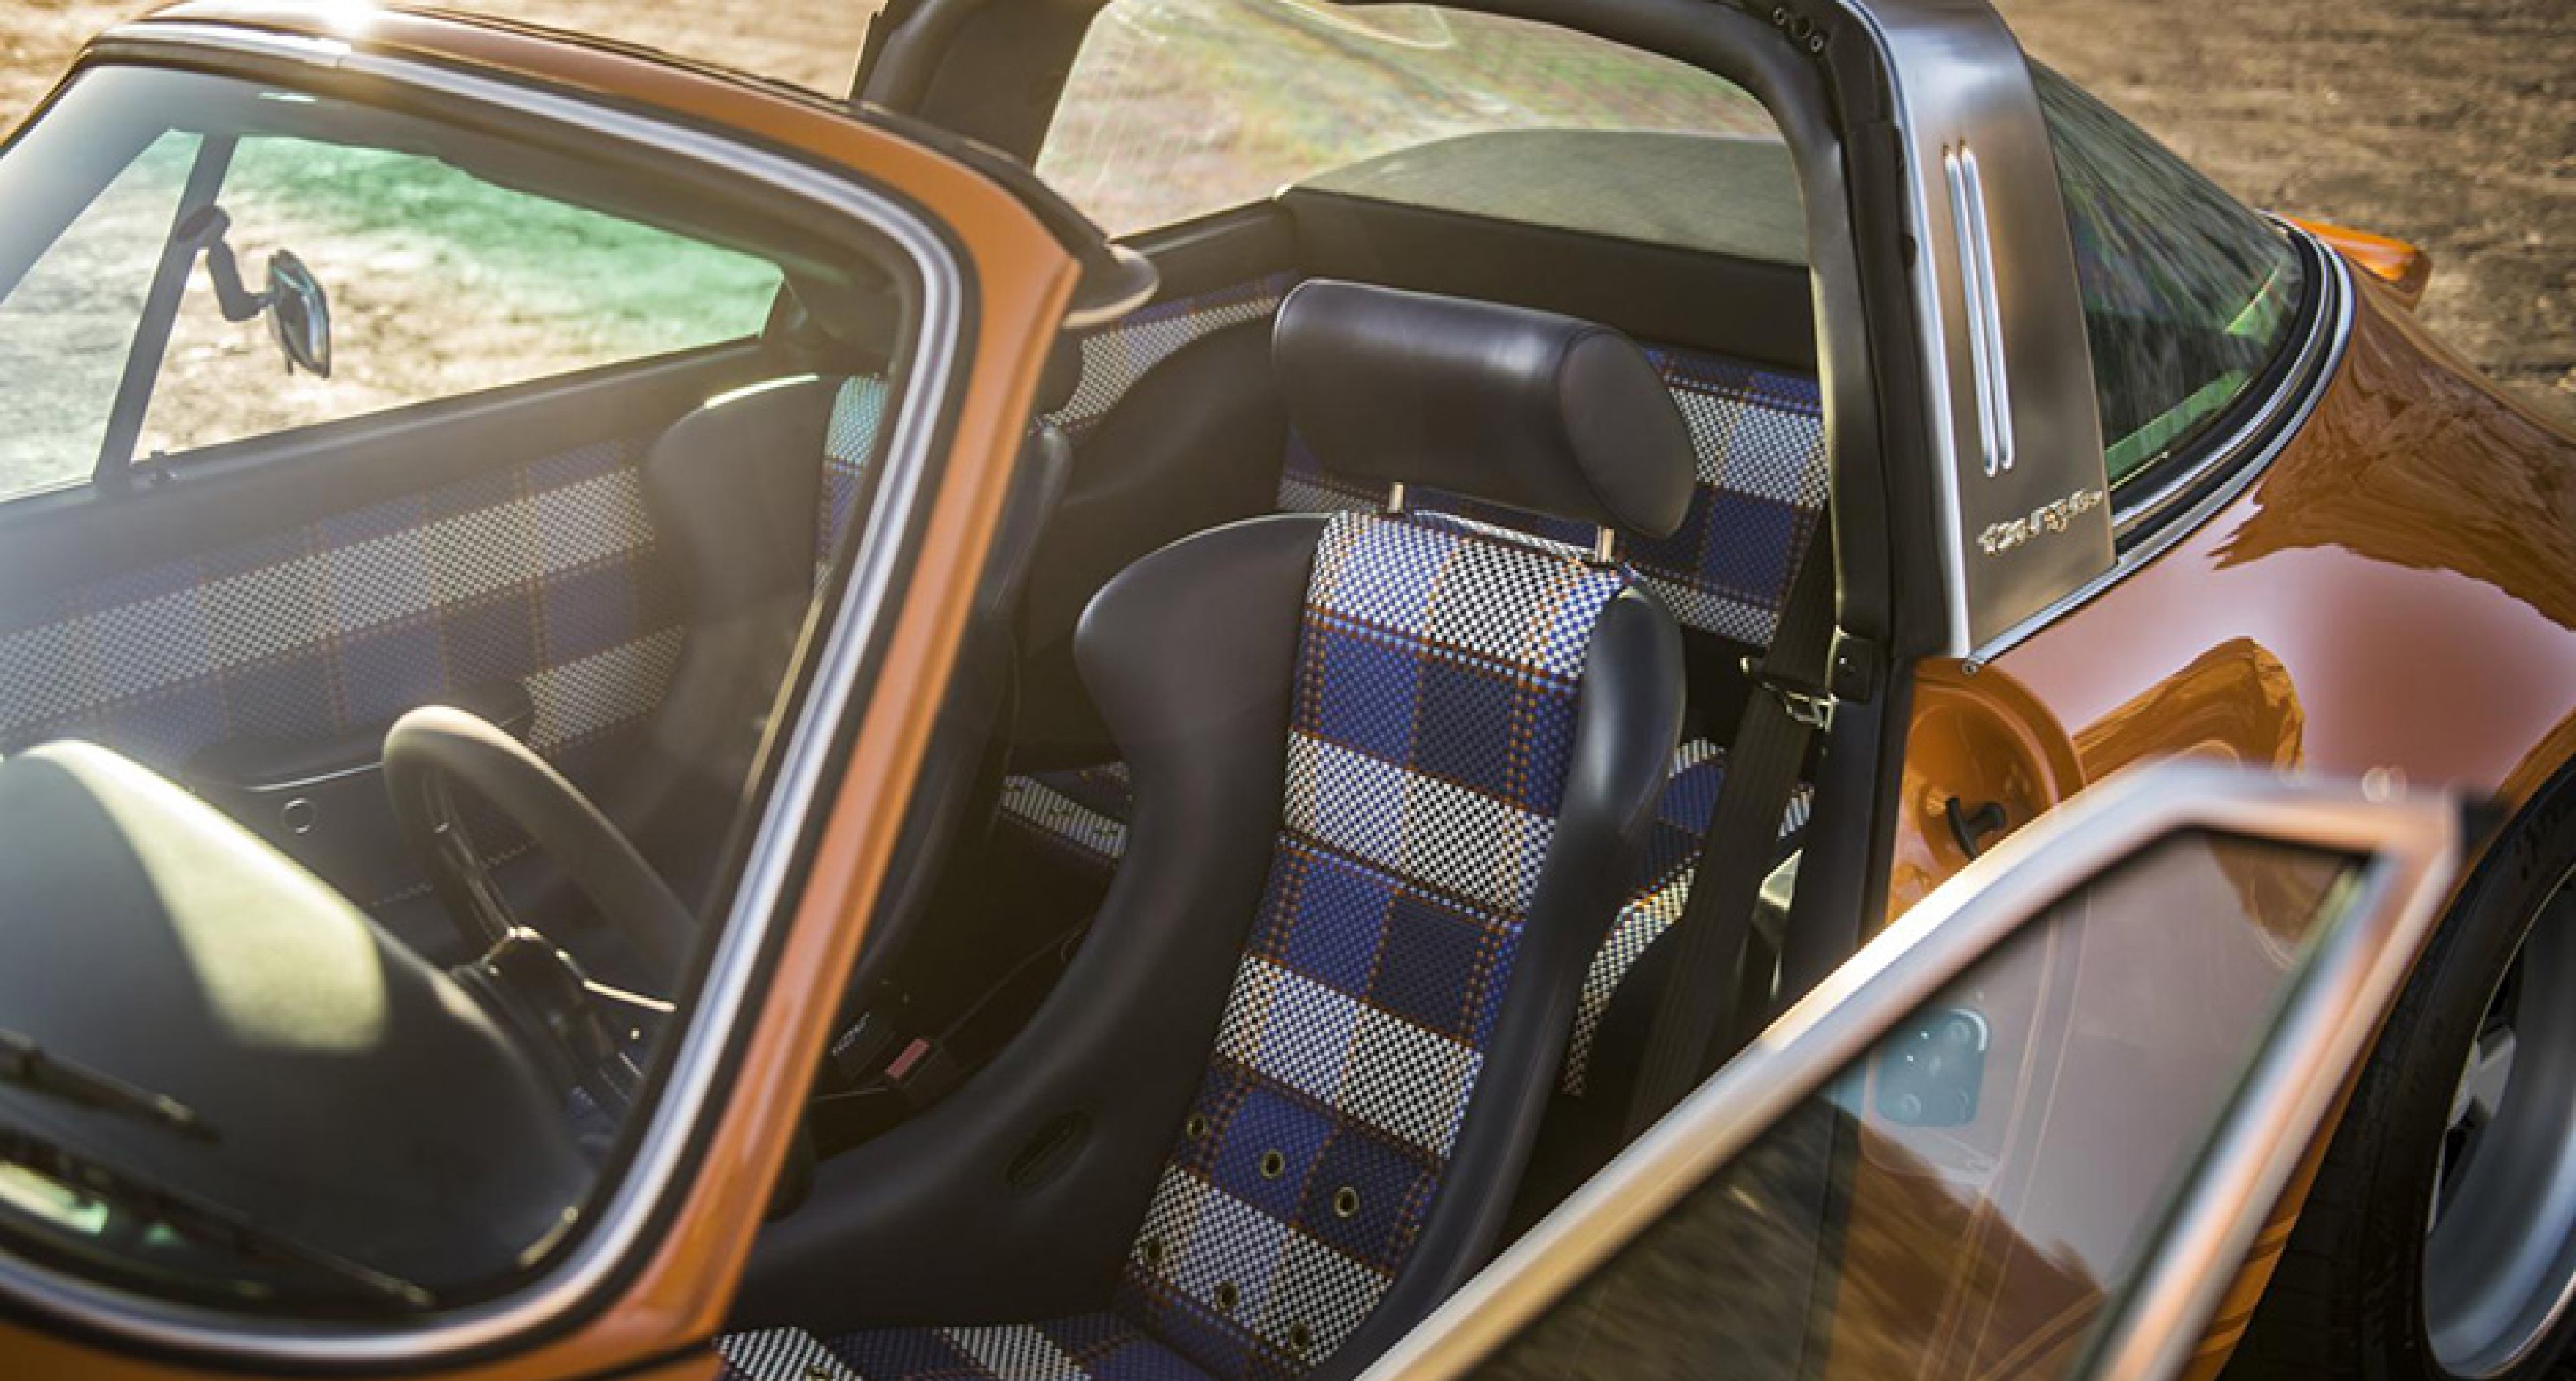 Singer S Latest Restomod 911 Has The Wildest Interior You Ve